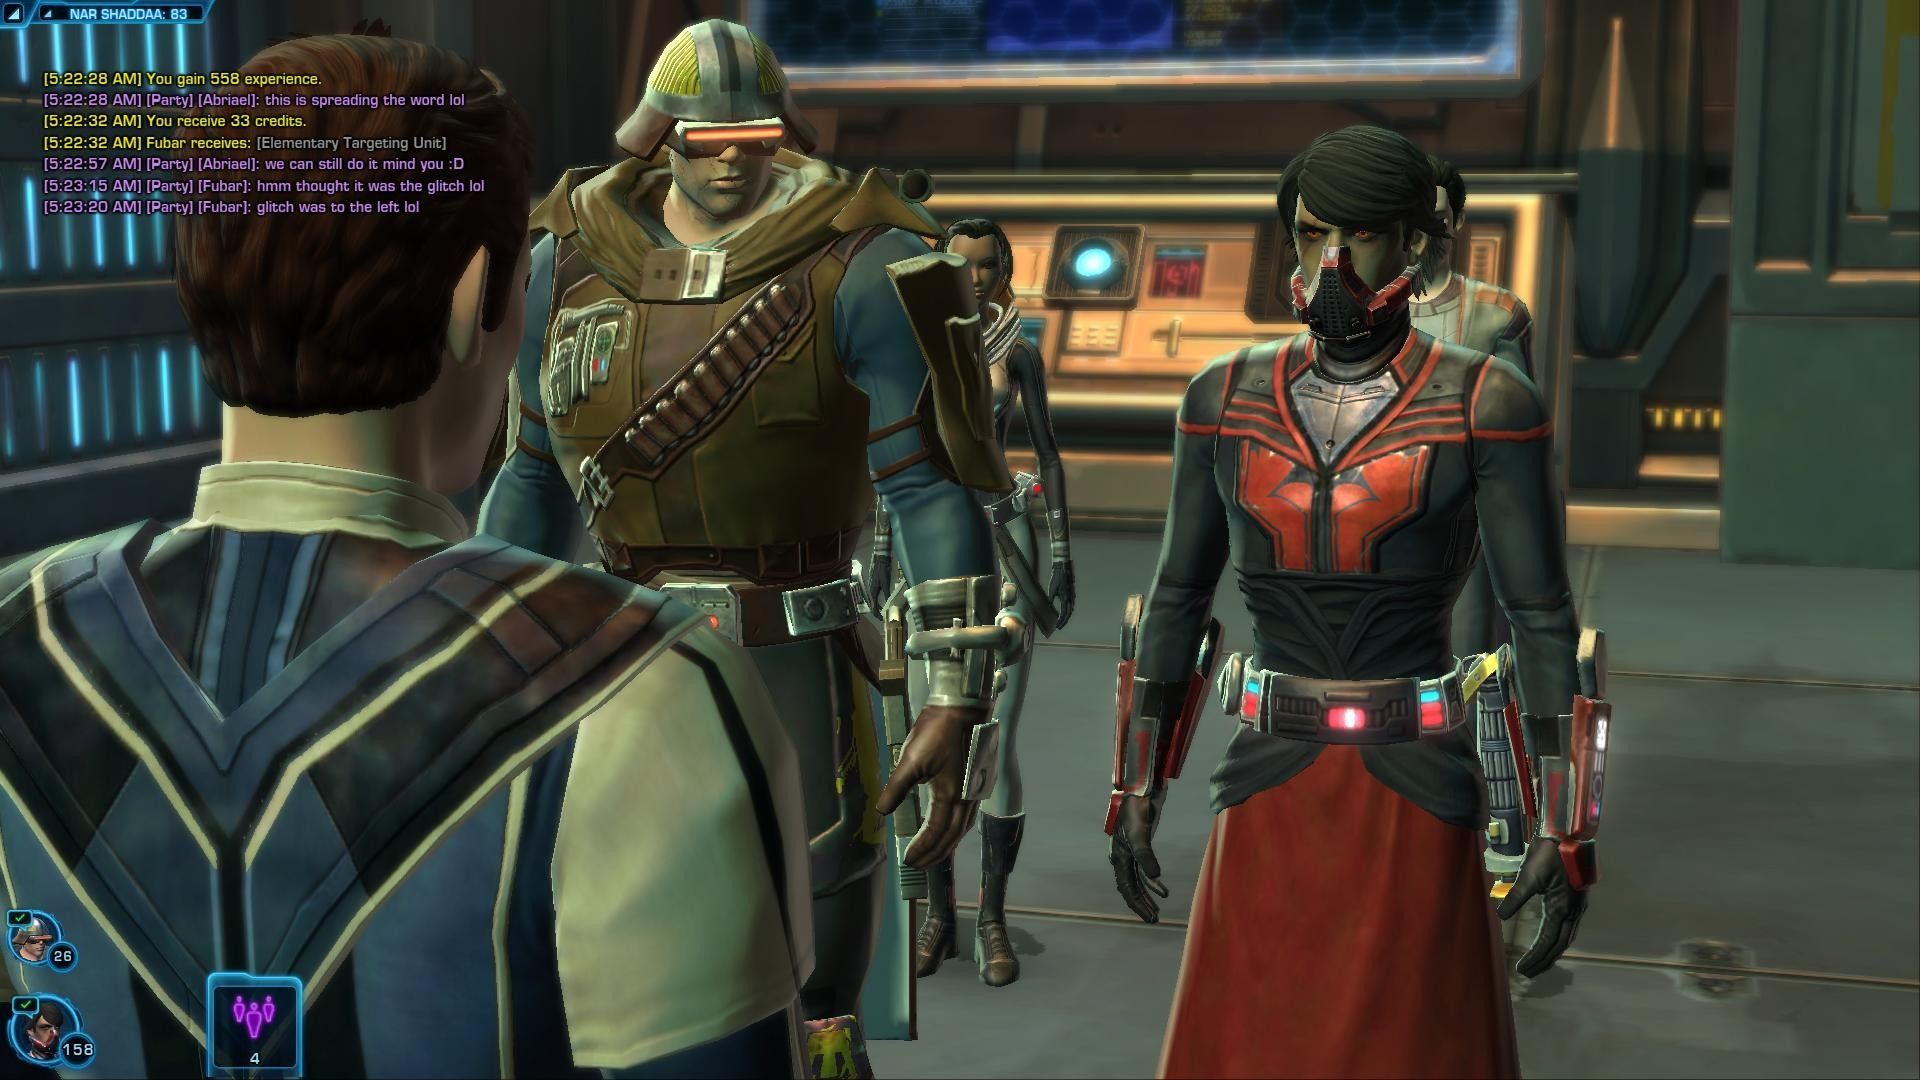 Star wars knight of the old republic 2 русификатор steam фото 52